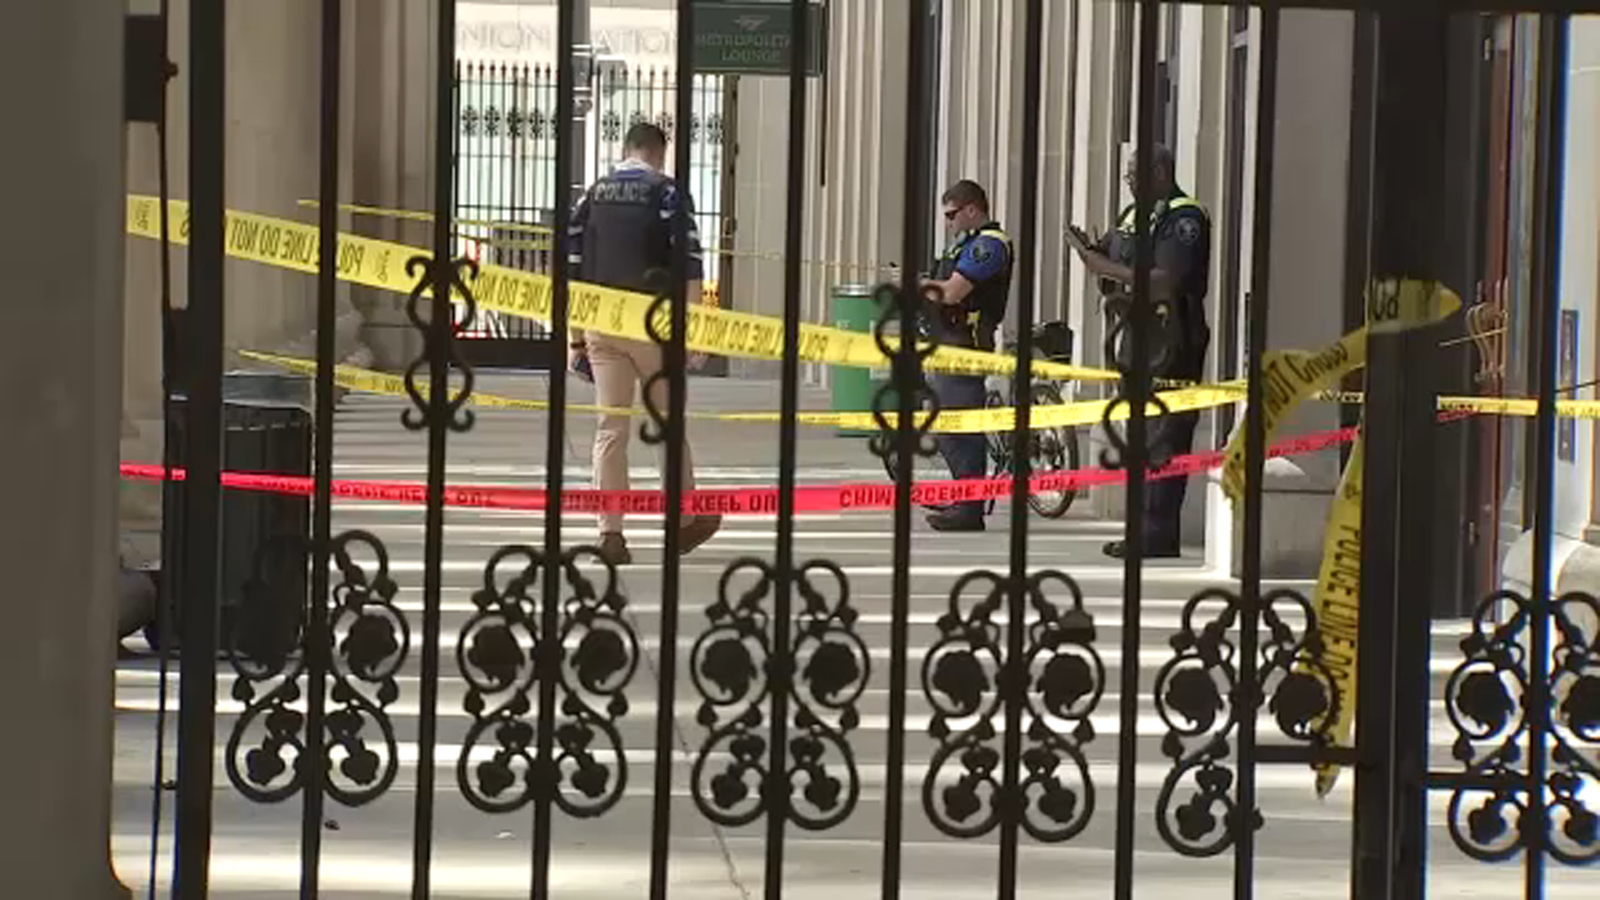 Woman, 71, critically injured in stabbing near Union Station in downtown, Chicago police say